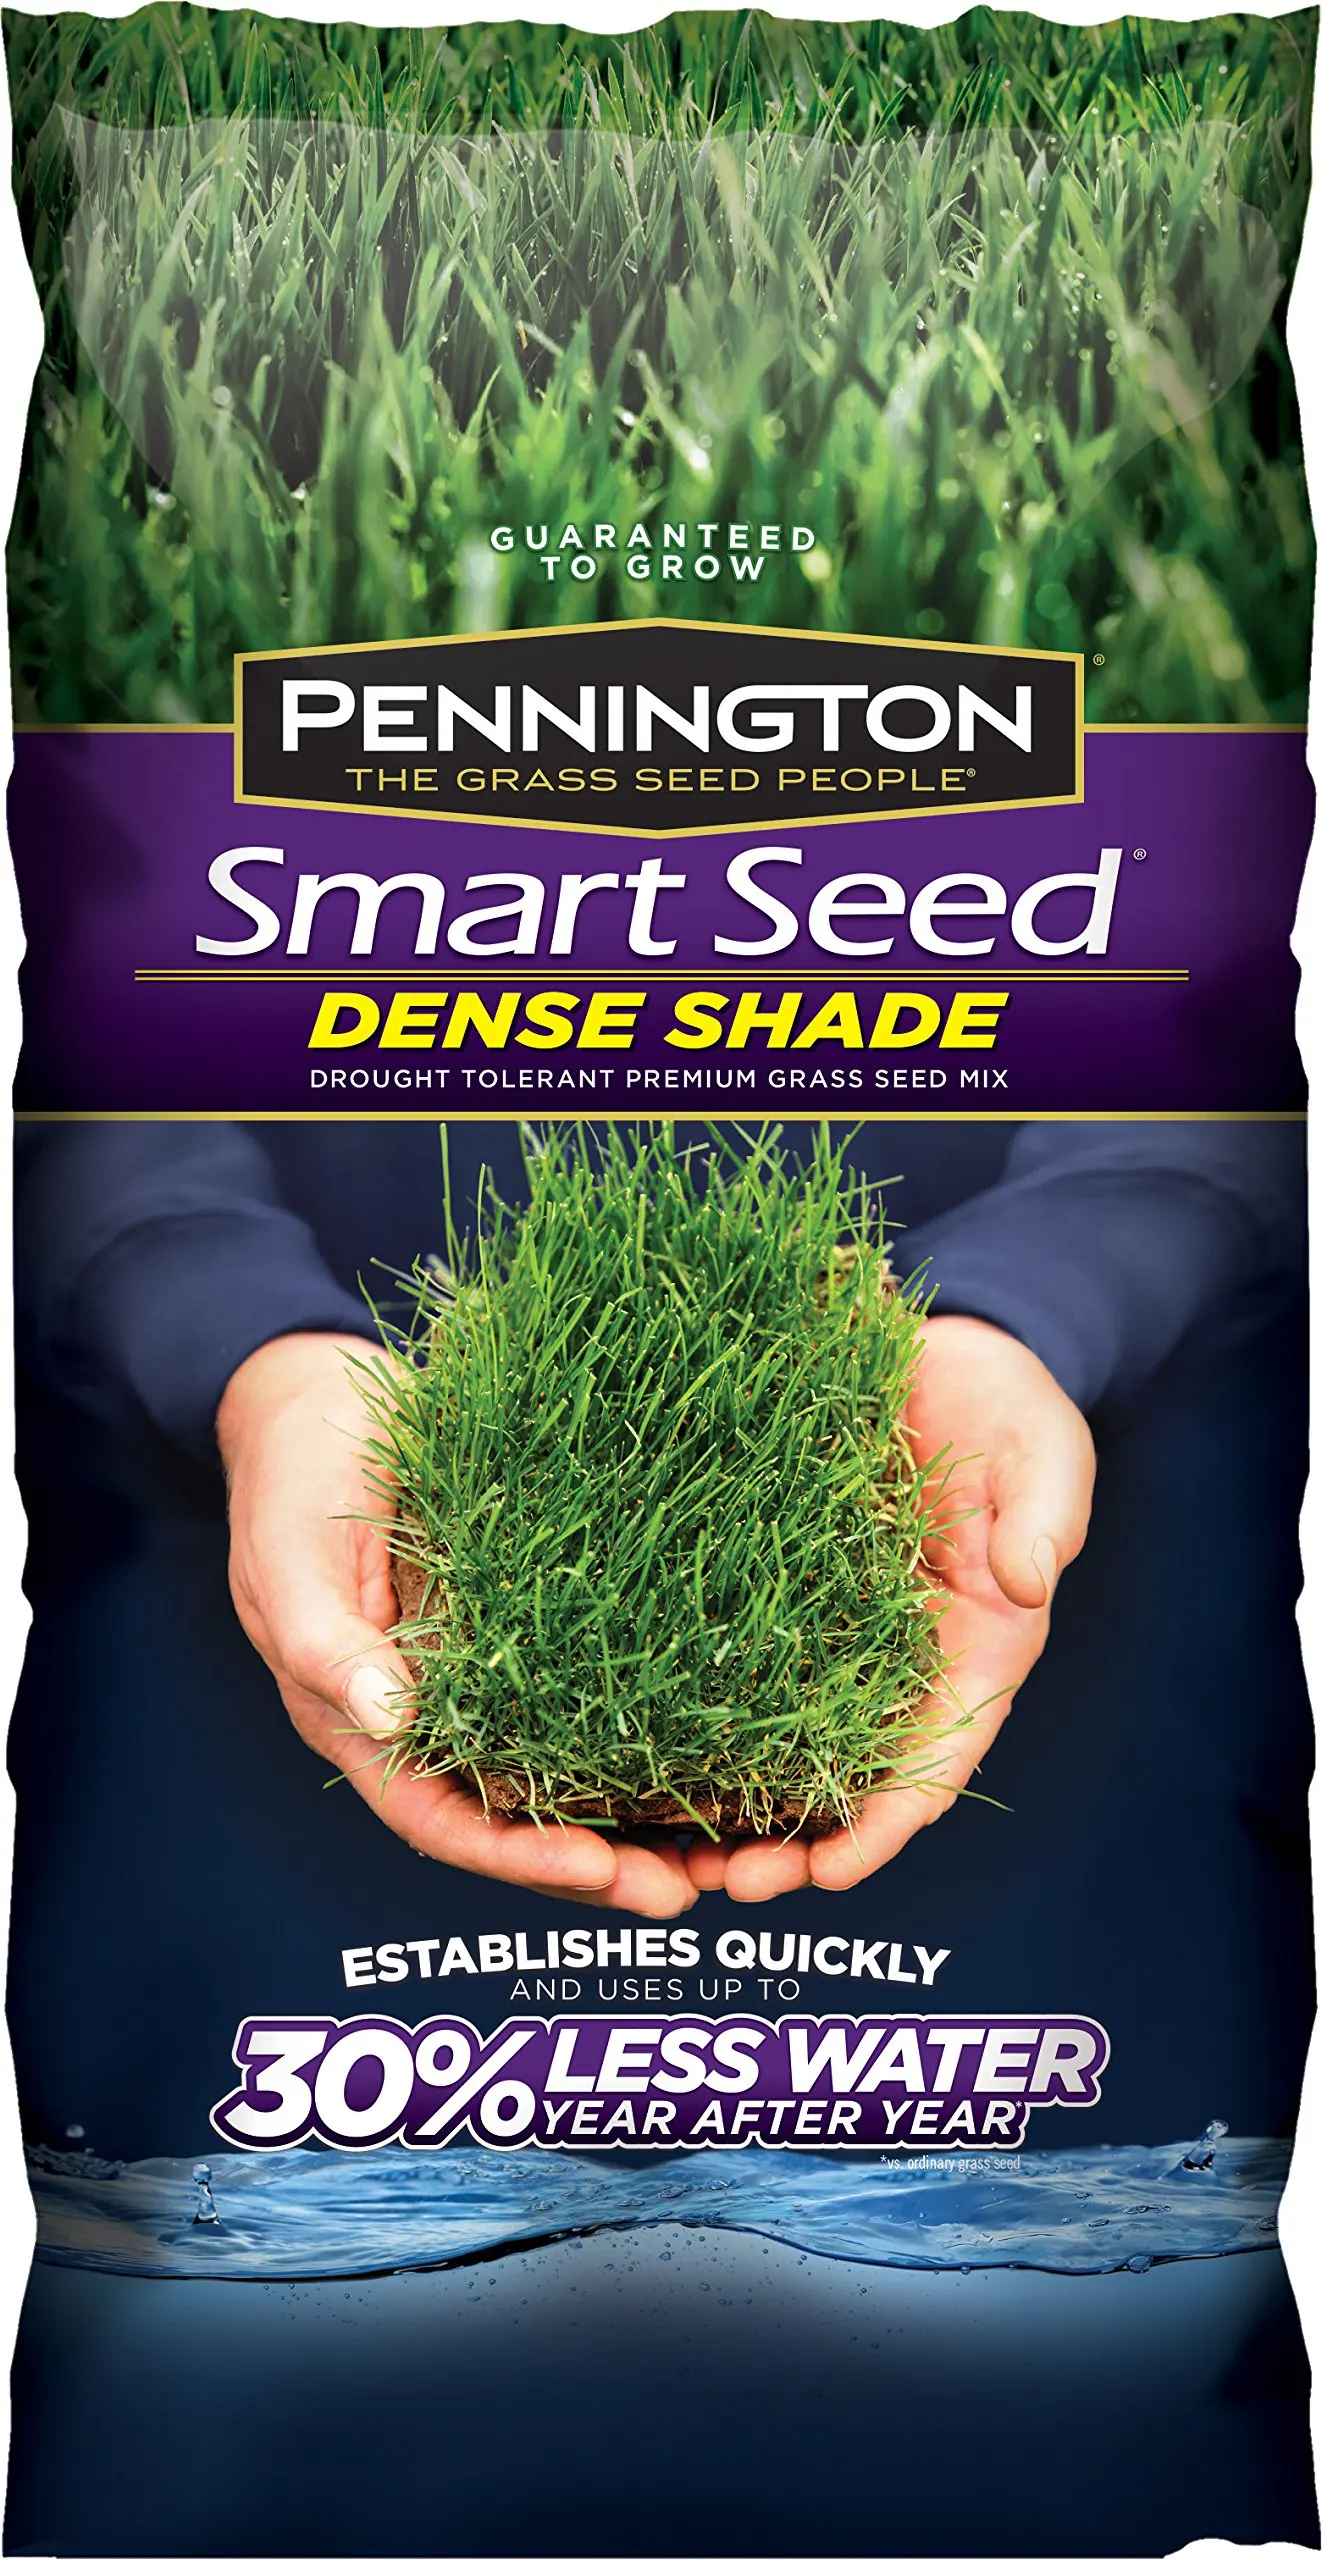 cheapest way to buy grass seed